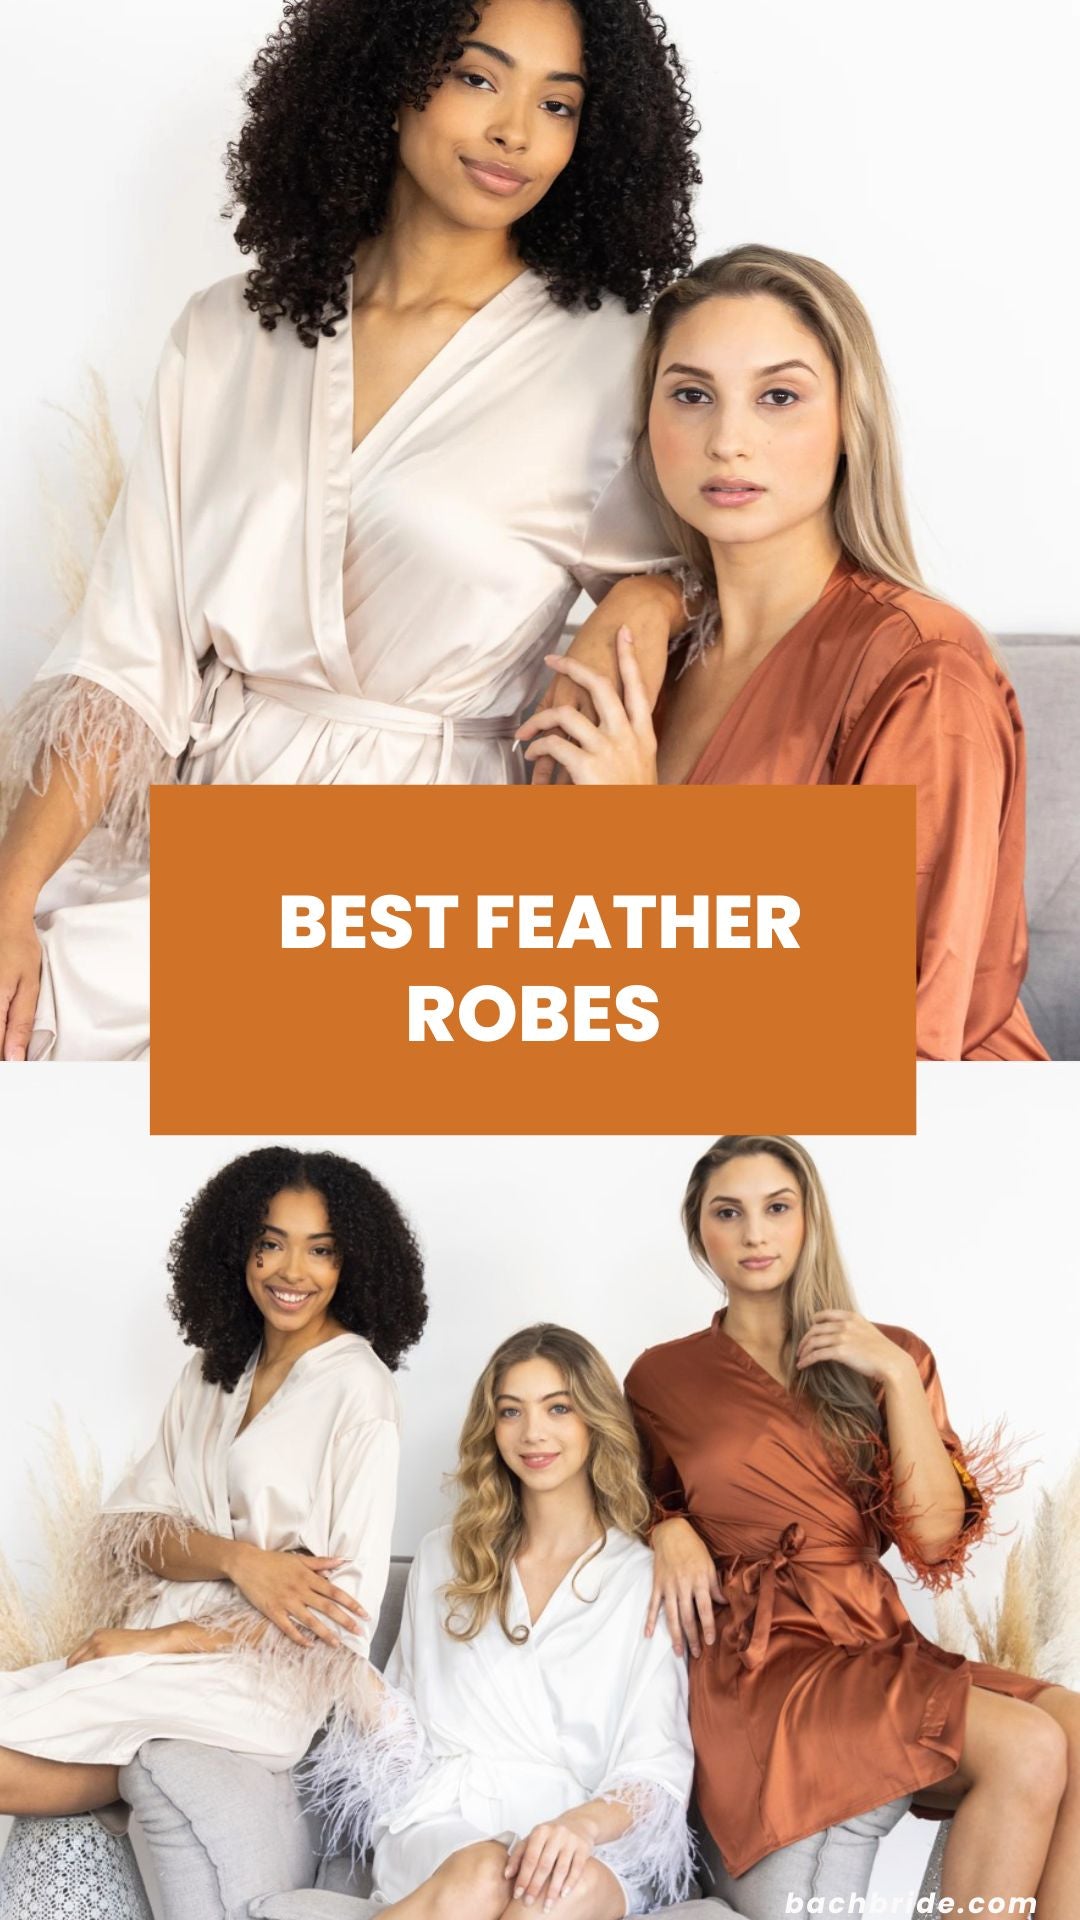 Top Feather Robes for Luxurious Comfort and Style - Bach Bride